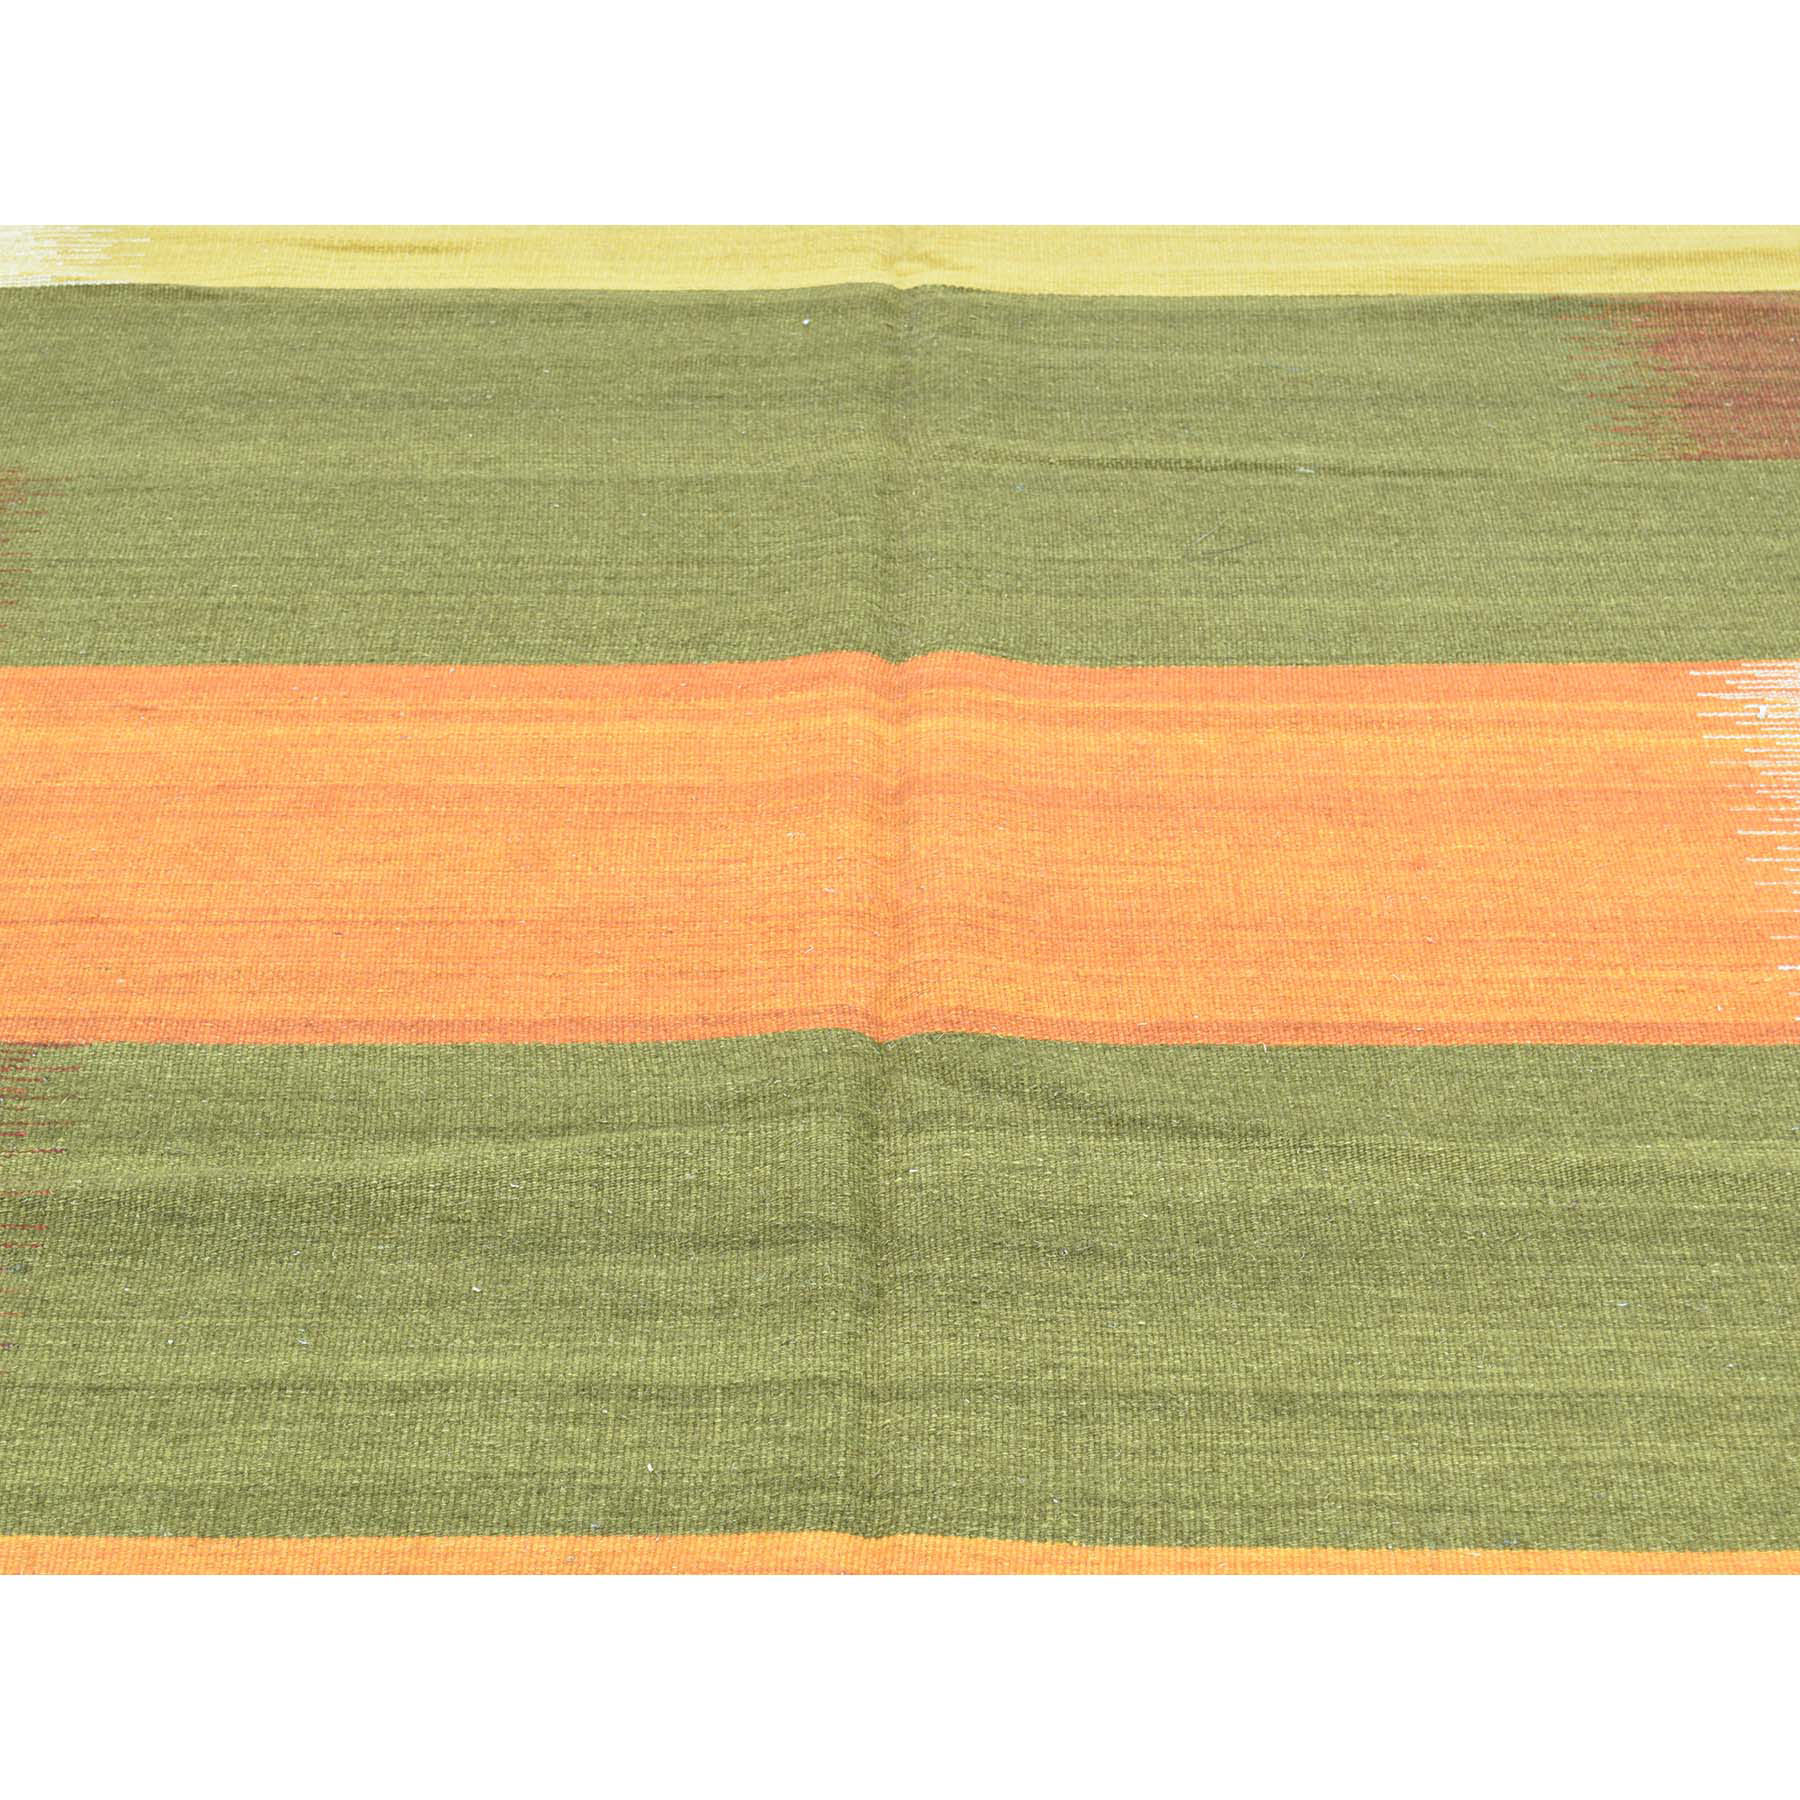 9-1 x12-6  Hand-Woven Durie Kilim Pure Wool Flat Weave Colorful Rug 